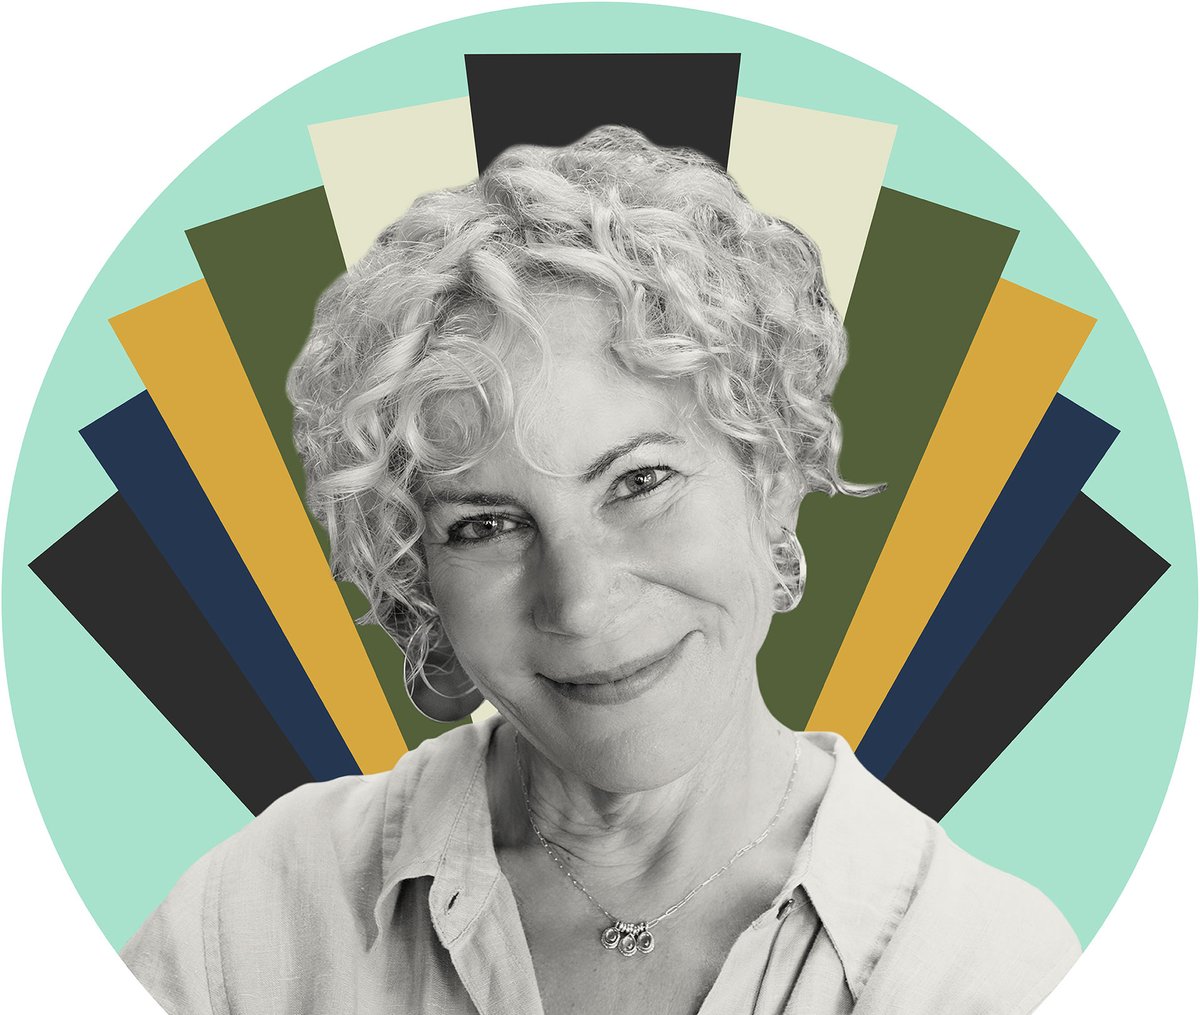 Barbara Glazer on her brilliant career in entertainment marketing: bit.ly/3DBJ8Zt This piece is part of our #Backstory series, where we chat with folks in the entertainment industry about their creative inspirations and more.